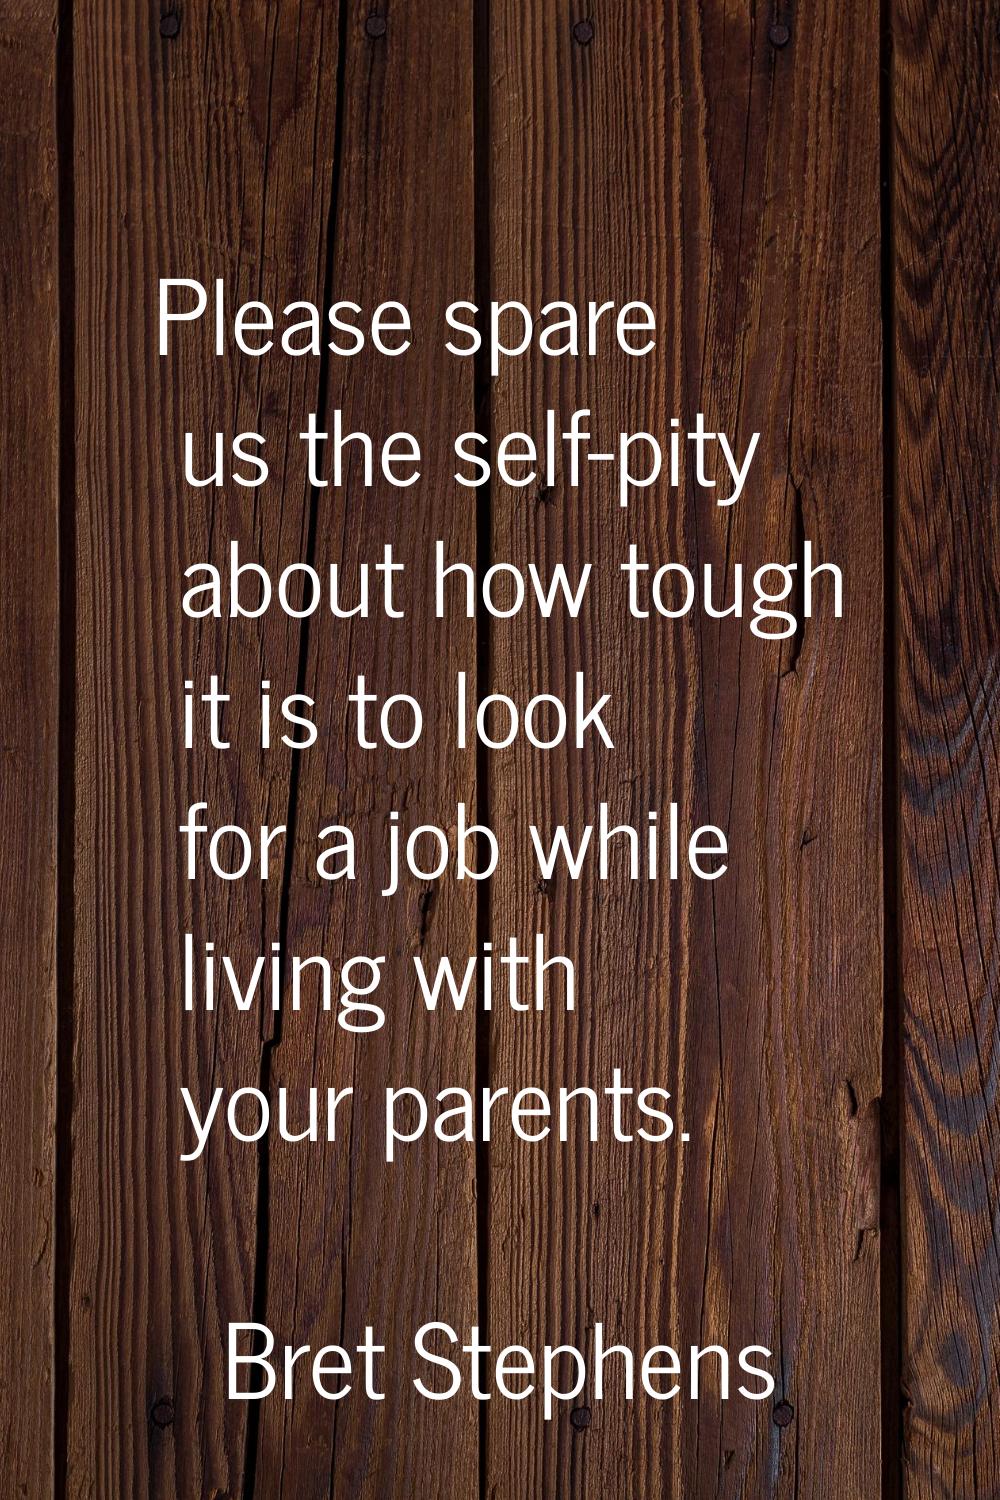 Please spare us the self-pity about how tough it is to look for a job while living with your parent